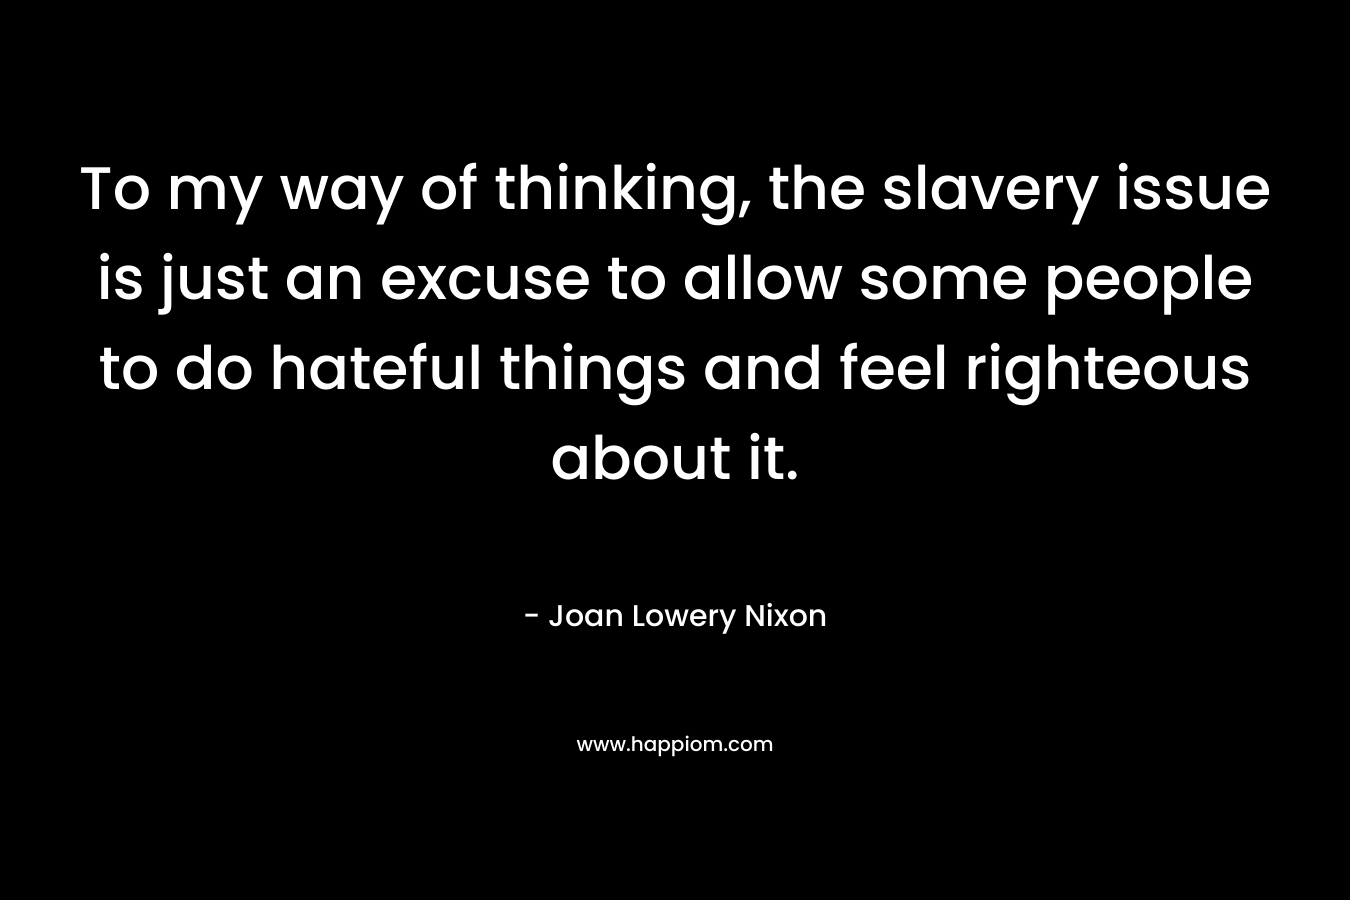 To my way of thinking, the slavery issue is just an excuse to allow some people to do hateful things and feel righteous about it.